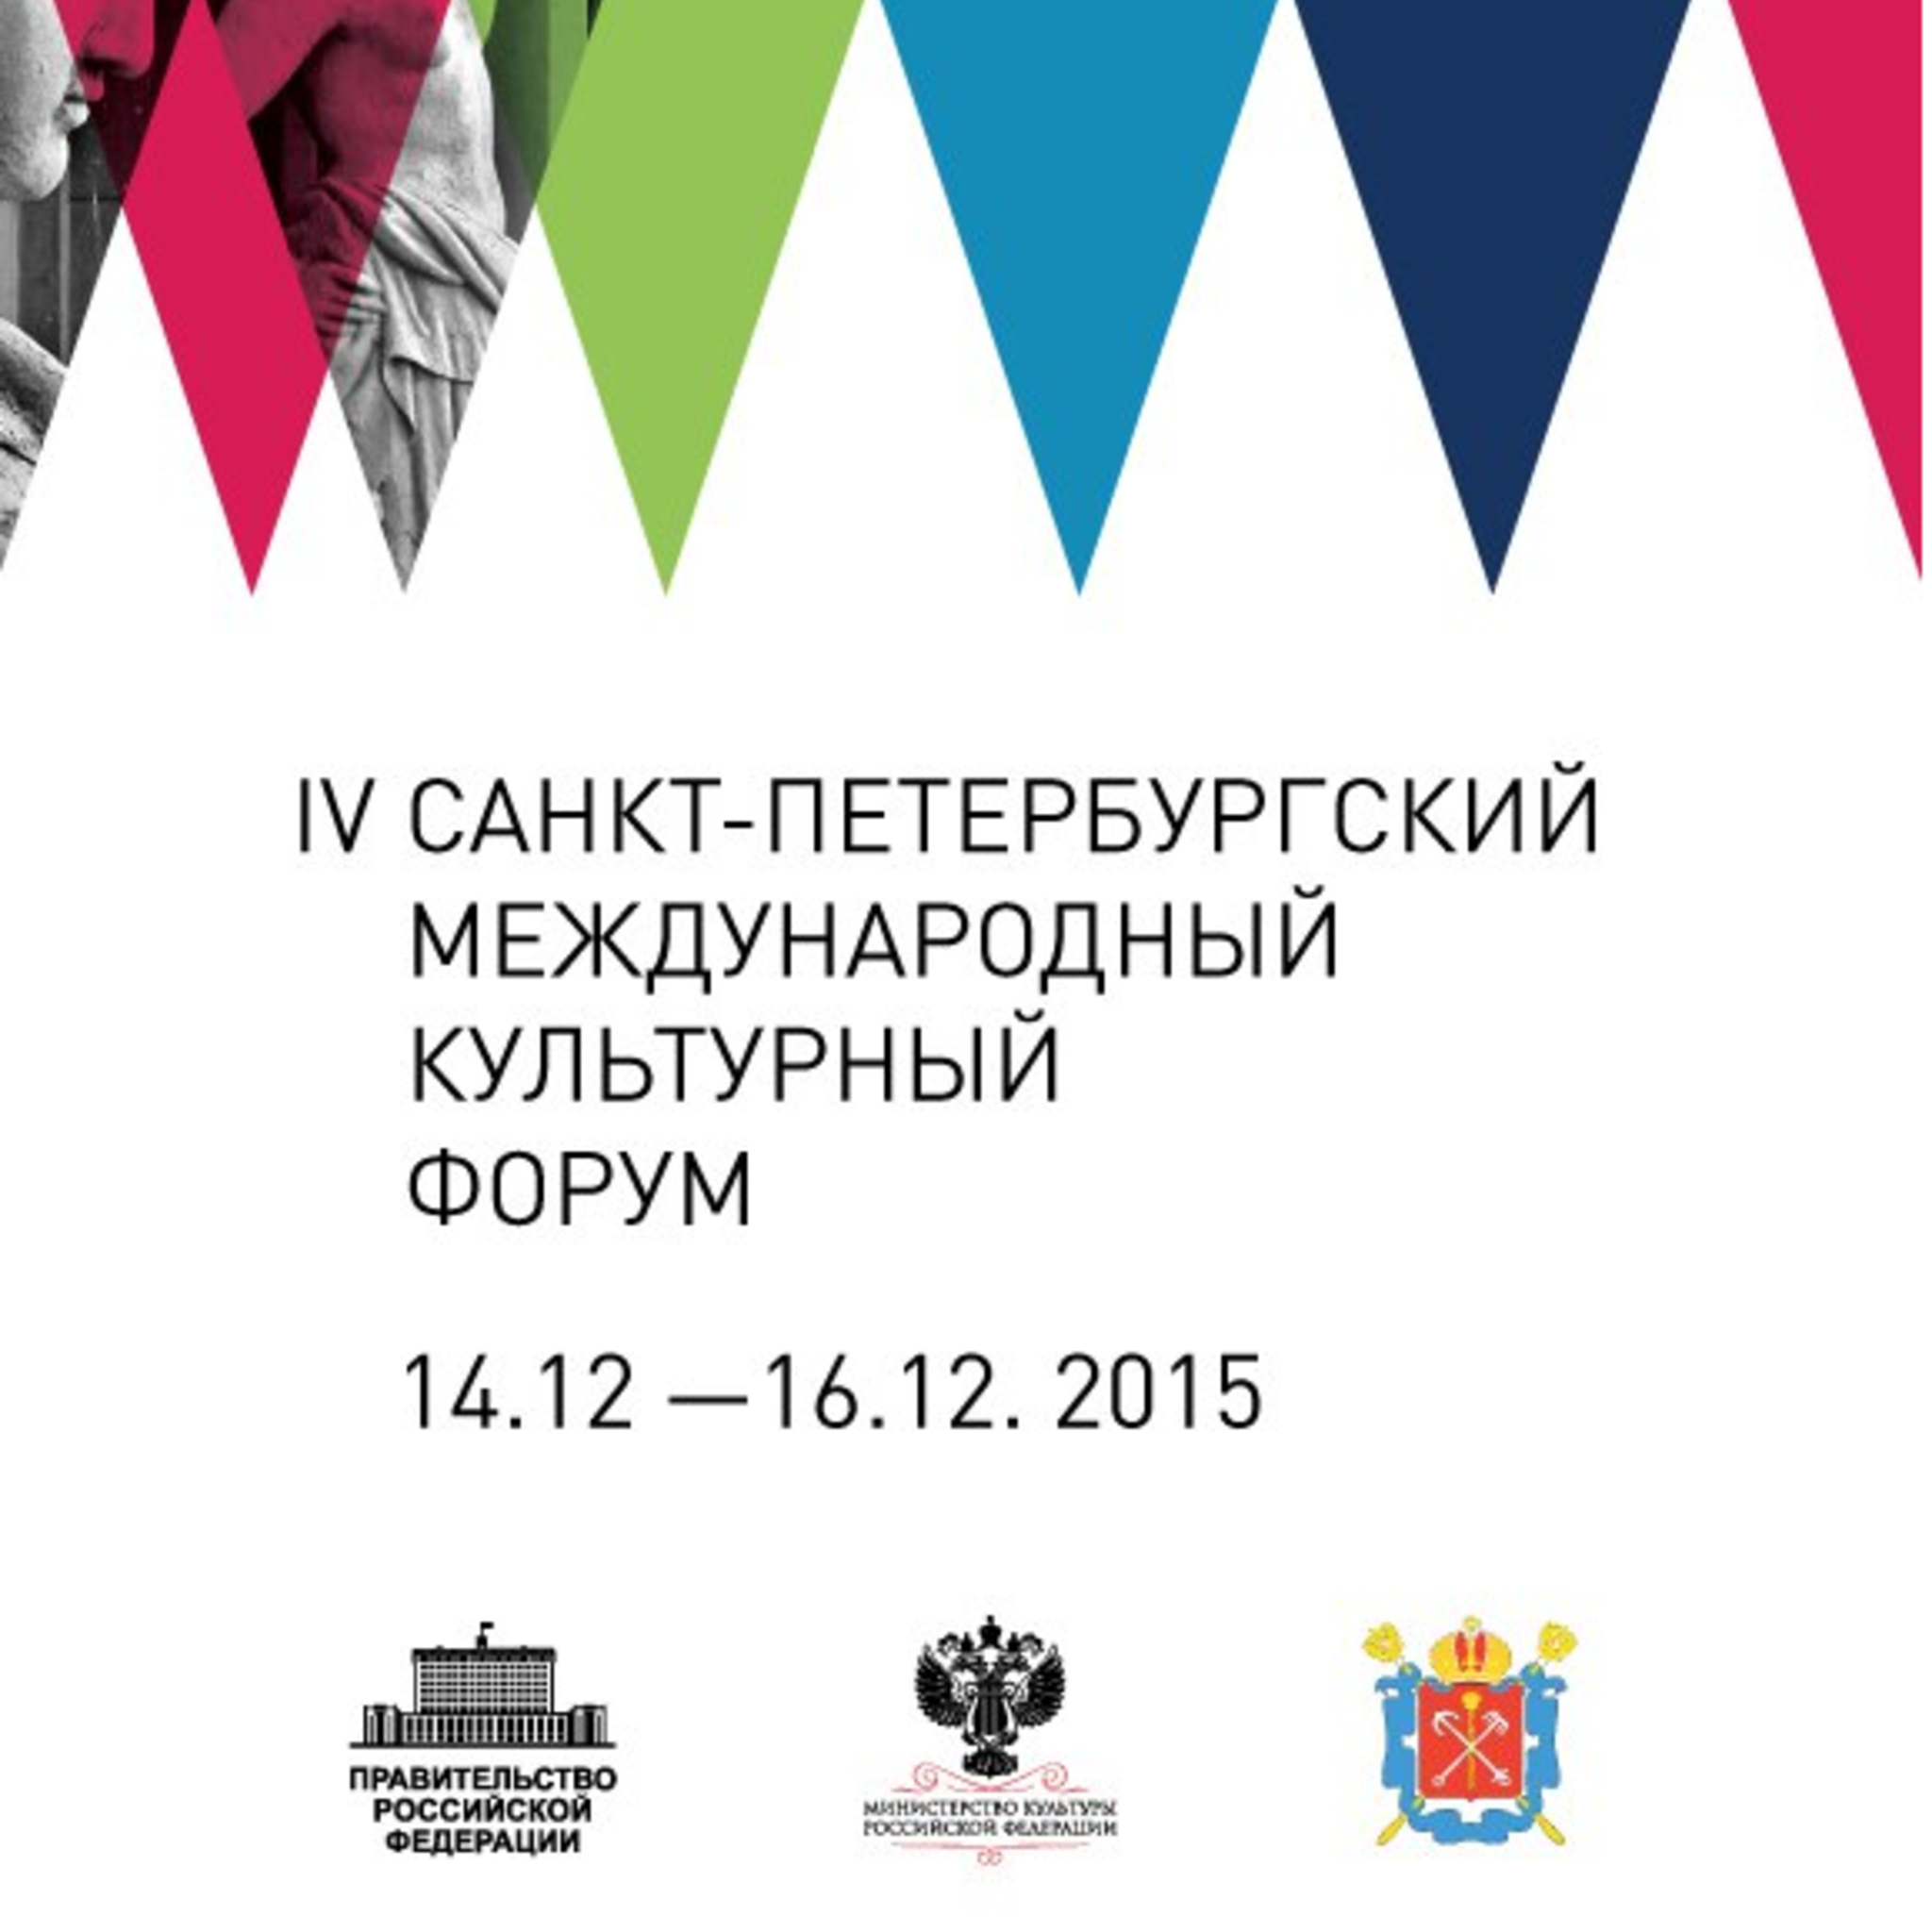 The program of activities of the Russian Museum in the IV St. Petersburg International Cultural Forum